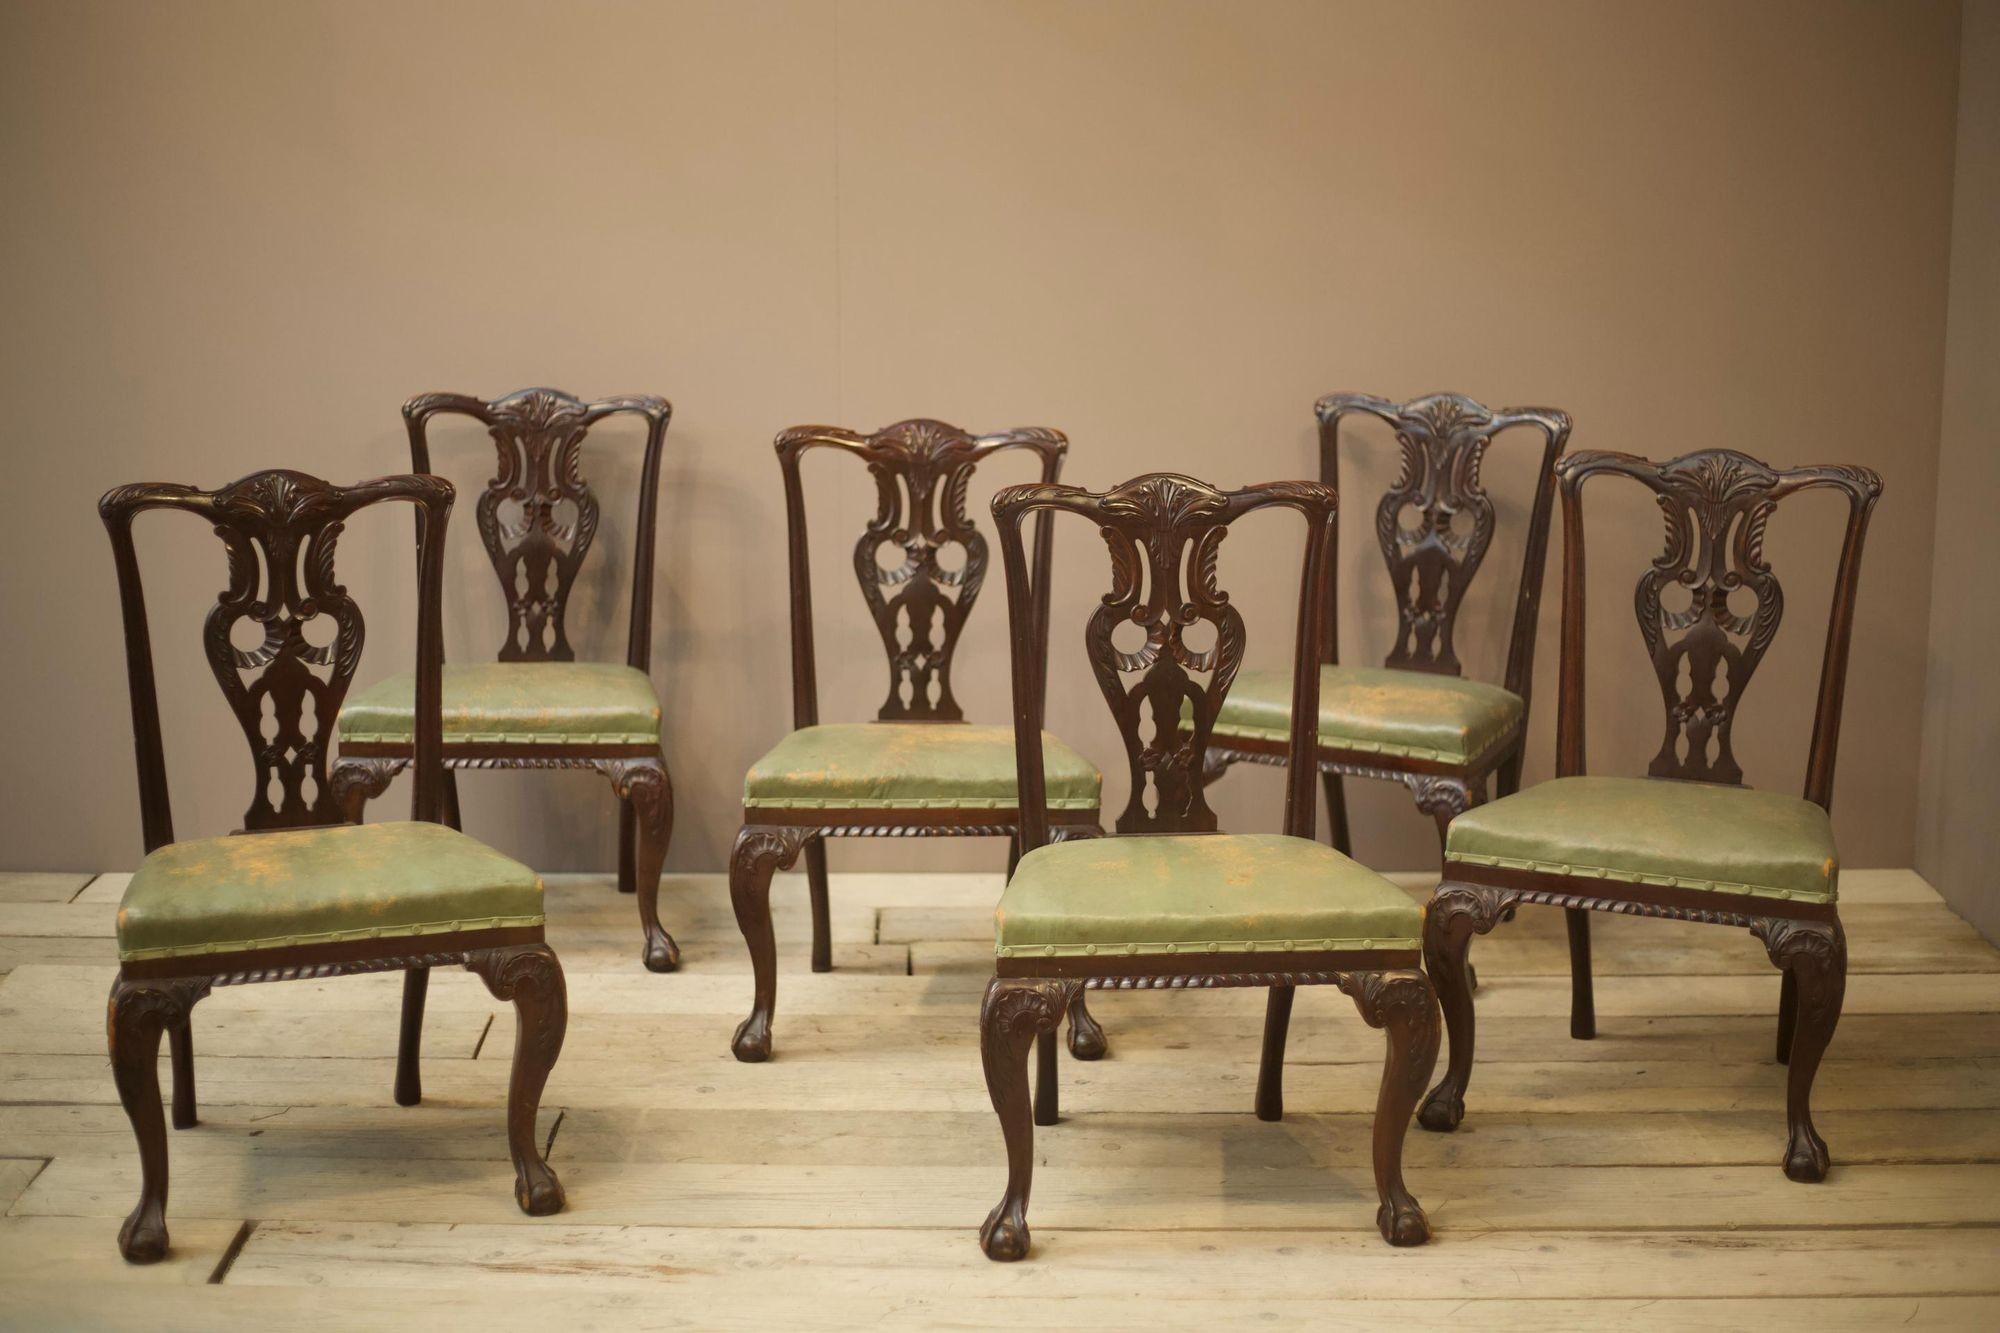 These are a fabulous set of Jas Shoolbred dining chairs. Made of mahogany and very much in the Georgian style. The carved detail is very nicely done and gives these an extremely impressive design which is accentuated beautifully with the original